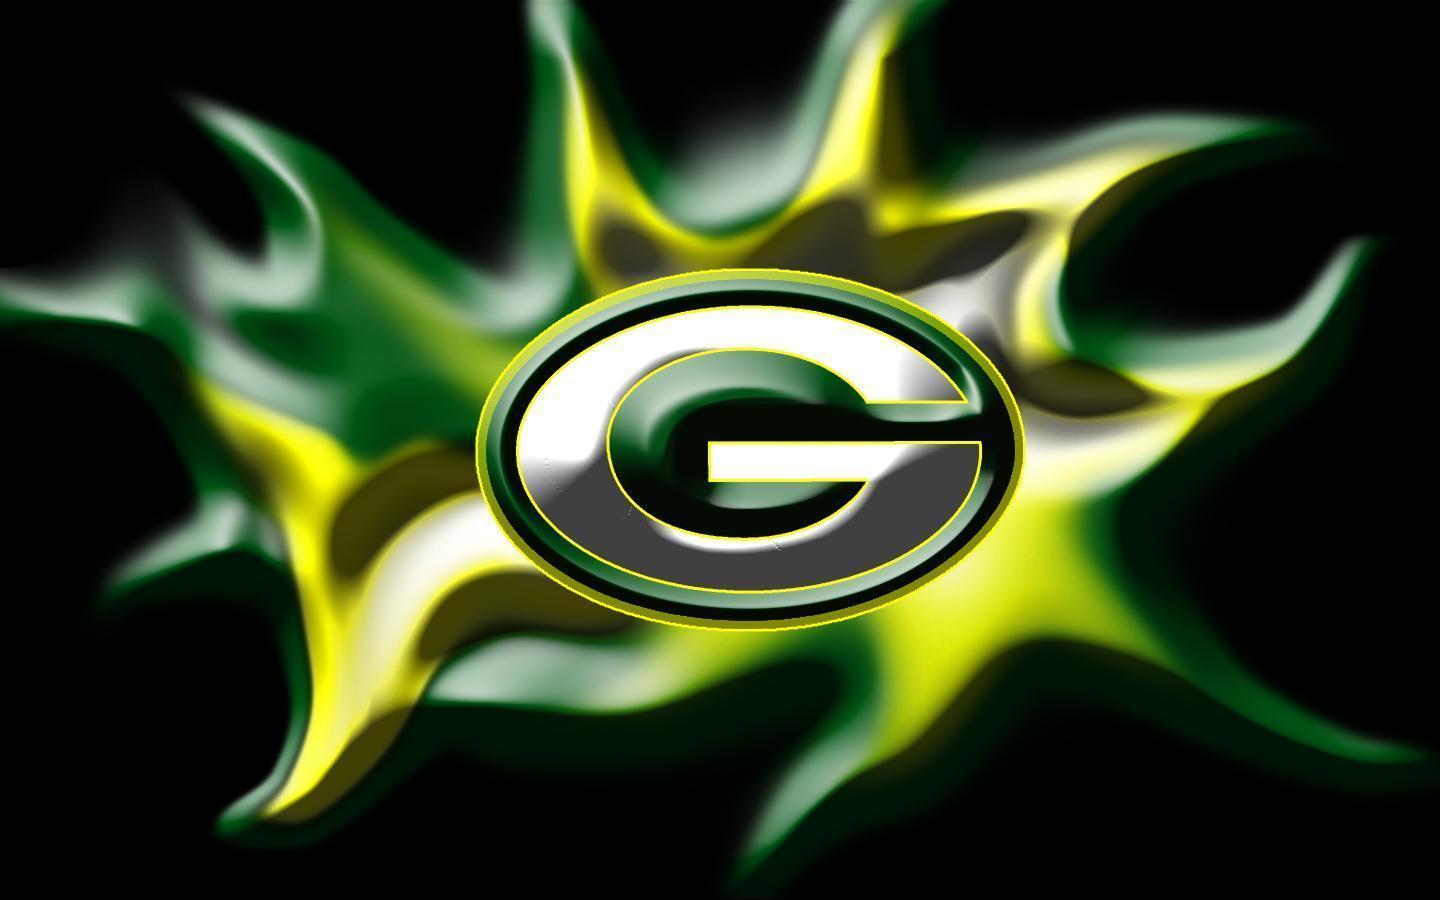 Logos, Awesome and Green bay packers wallpapers